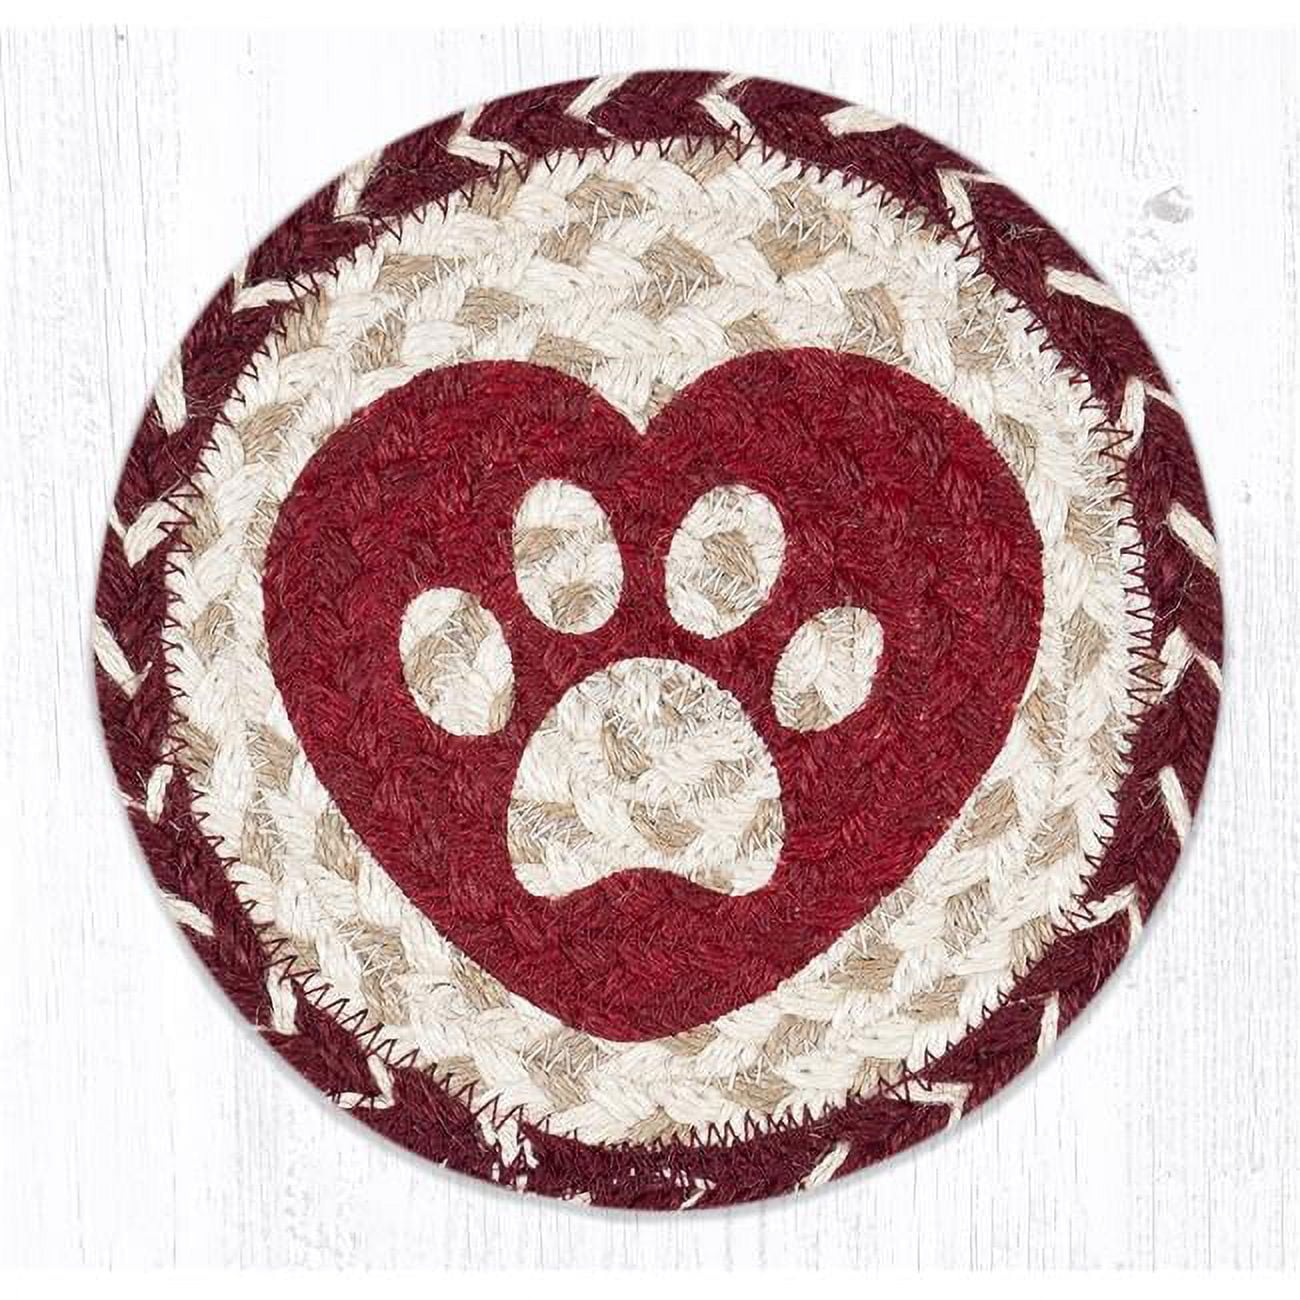 Capitol Importing 79-9-117hp 7 X 7 In. Lc-9-117 Heart Paw Round Large Coaster